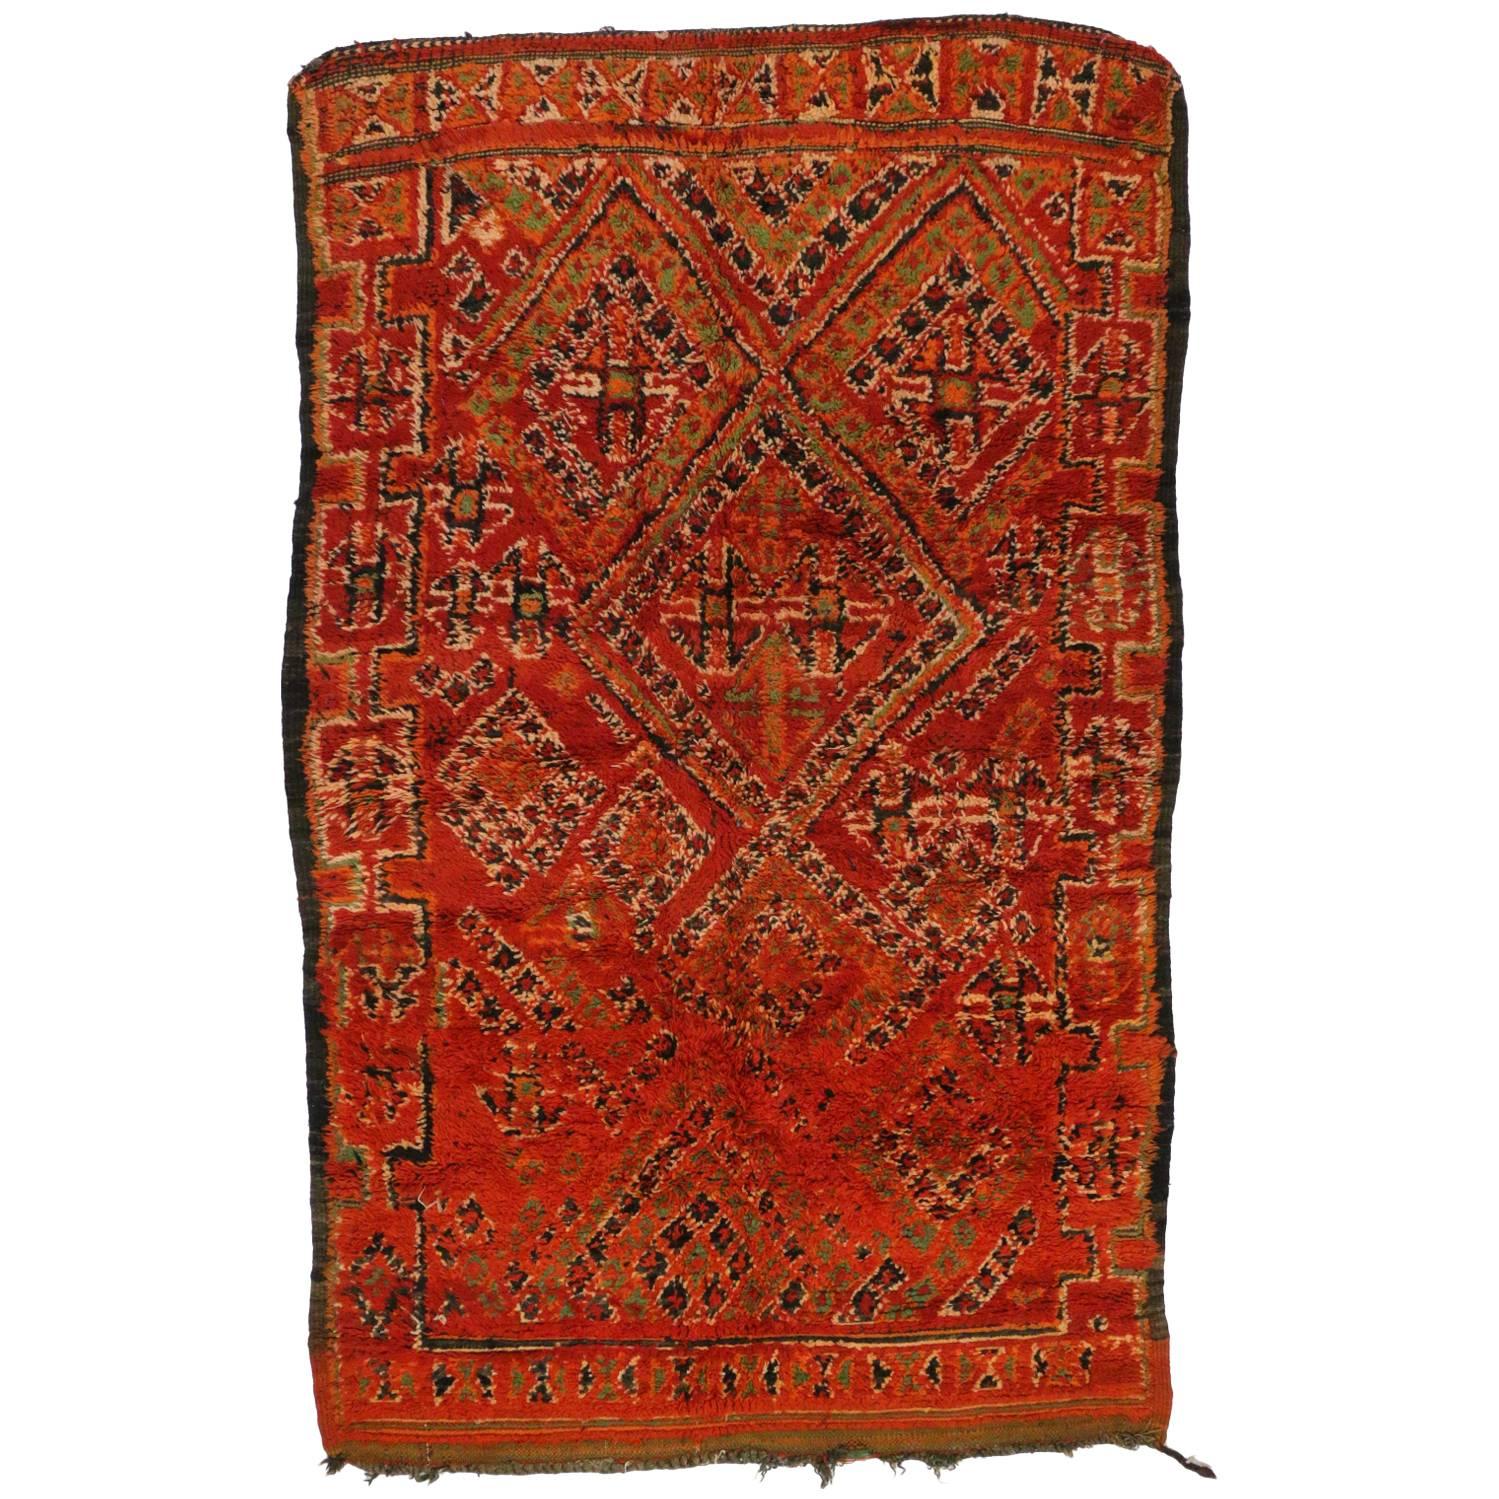 Vintage Berber Moroccan Rug with Mid-Century Modern Tribal Style